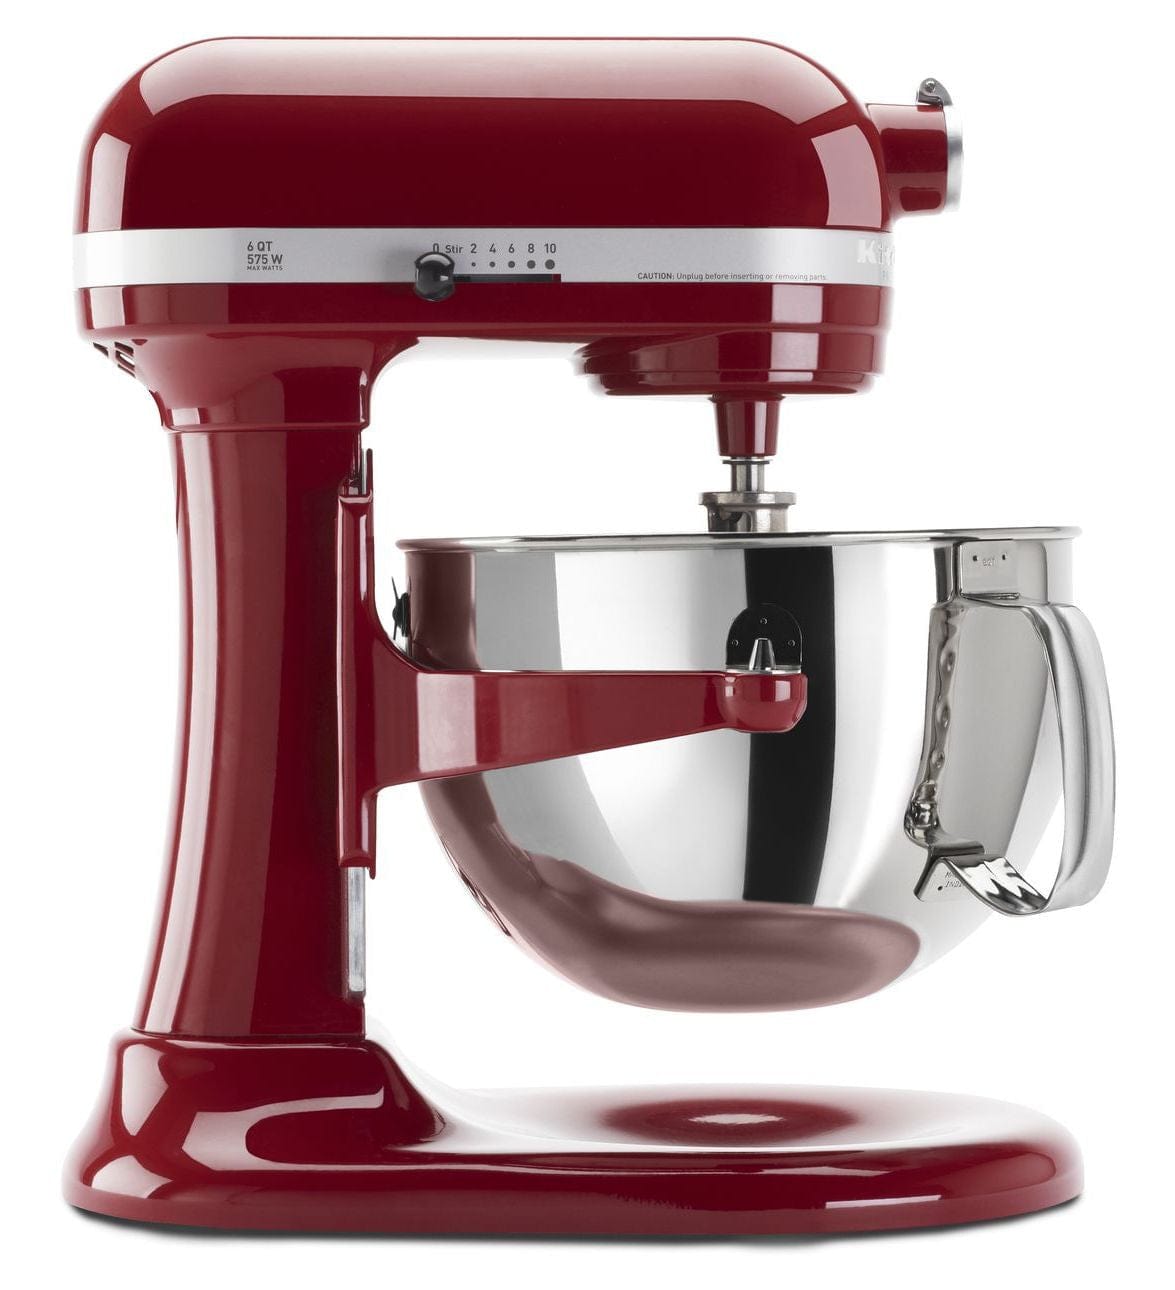 The Latest Kitchenaid 7 Qt Bowl-Lift Stand Mixer with Resdesigned Pemium  Touch Points KSM70KSM70SK Stainless Steel Tools KitchenAid is Now Available  at Amazing Prices